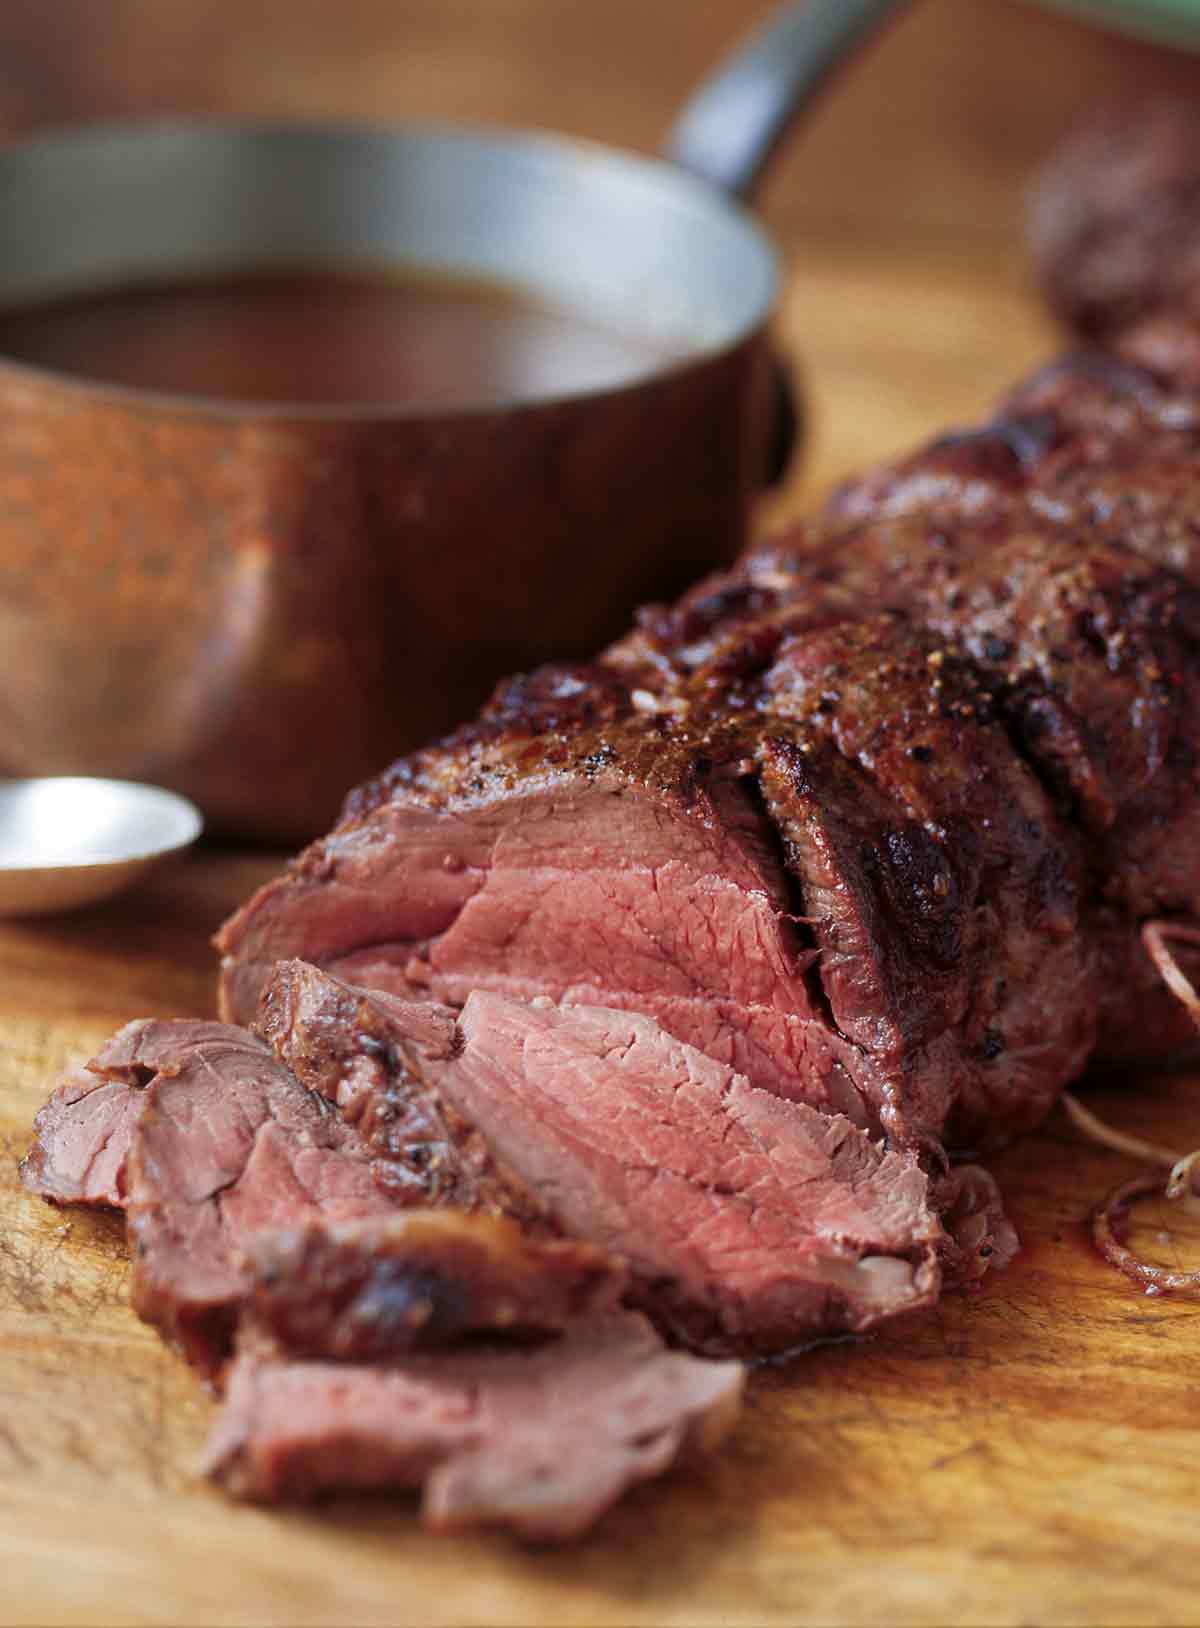 A perfectly roasted beef tenderloin with Madeira sauce on the side ion a copper pot